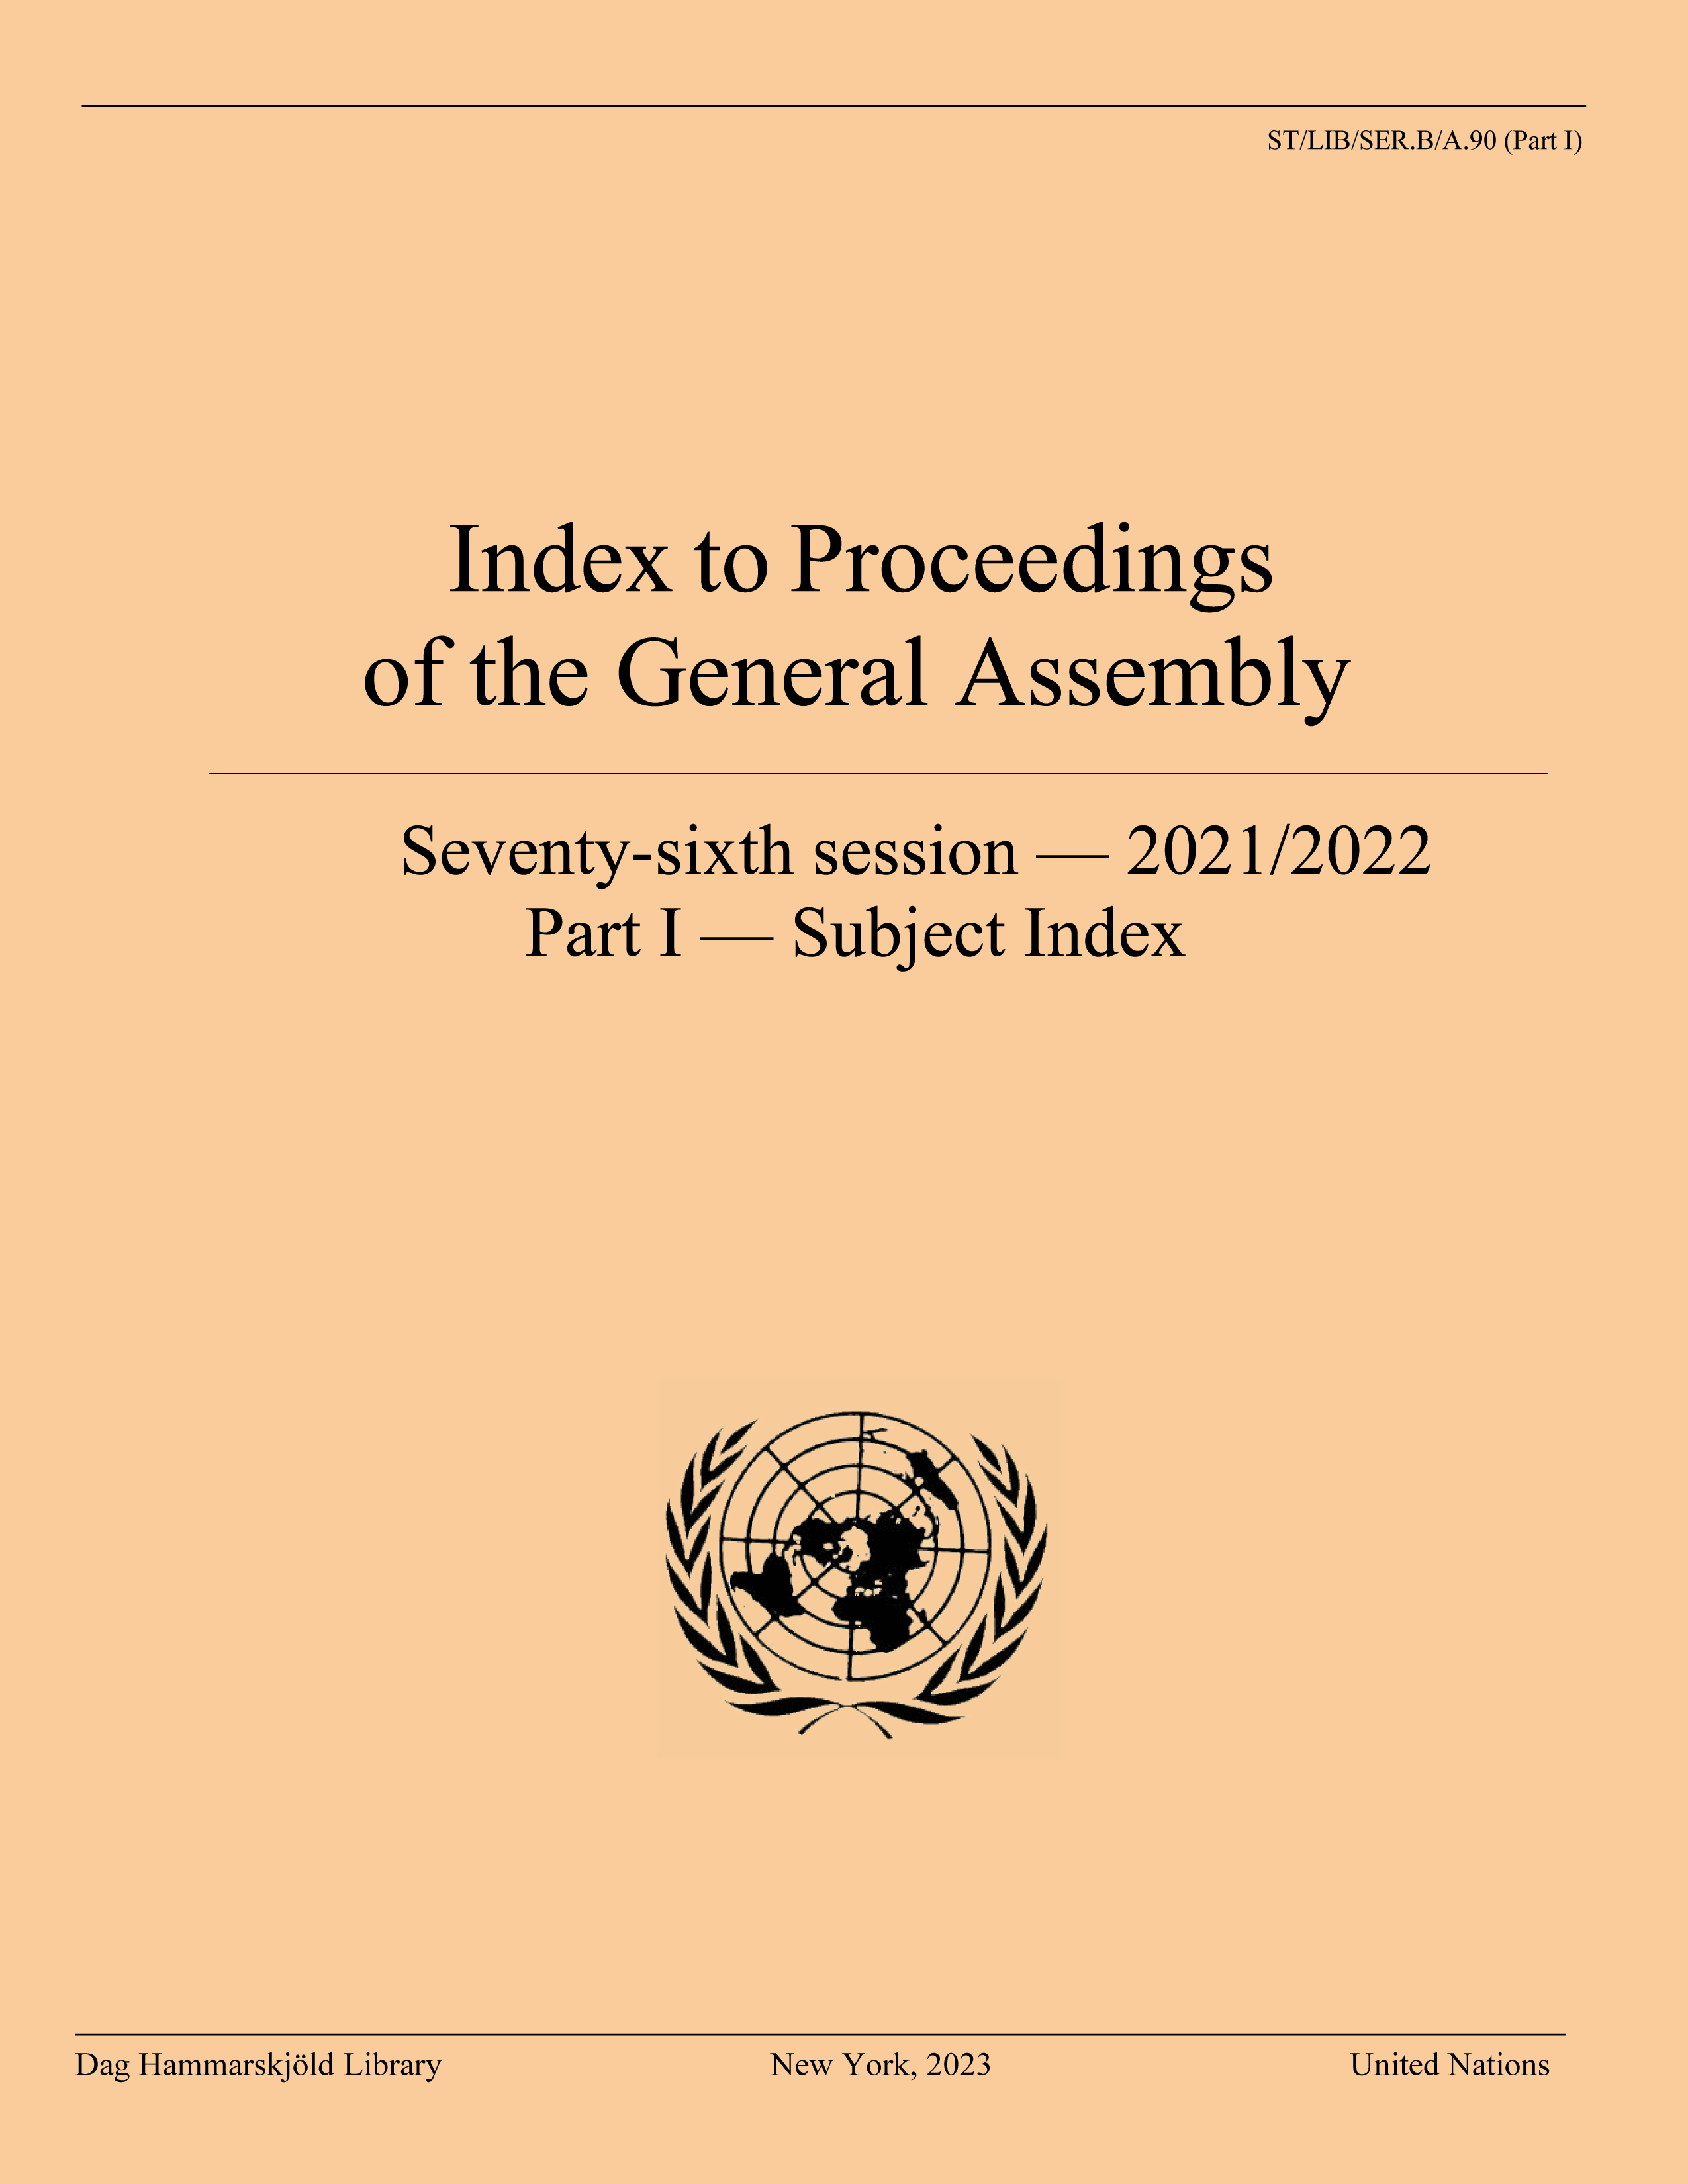 image of Index to Proceedings of the General Assembly 2021/2022